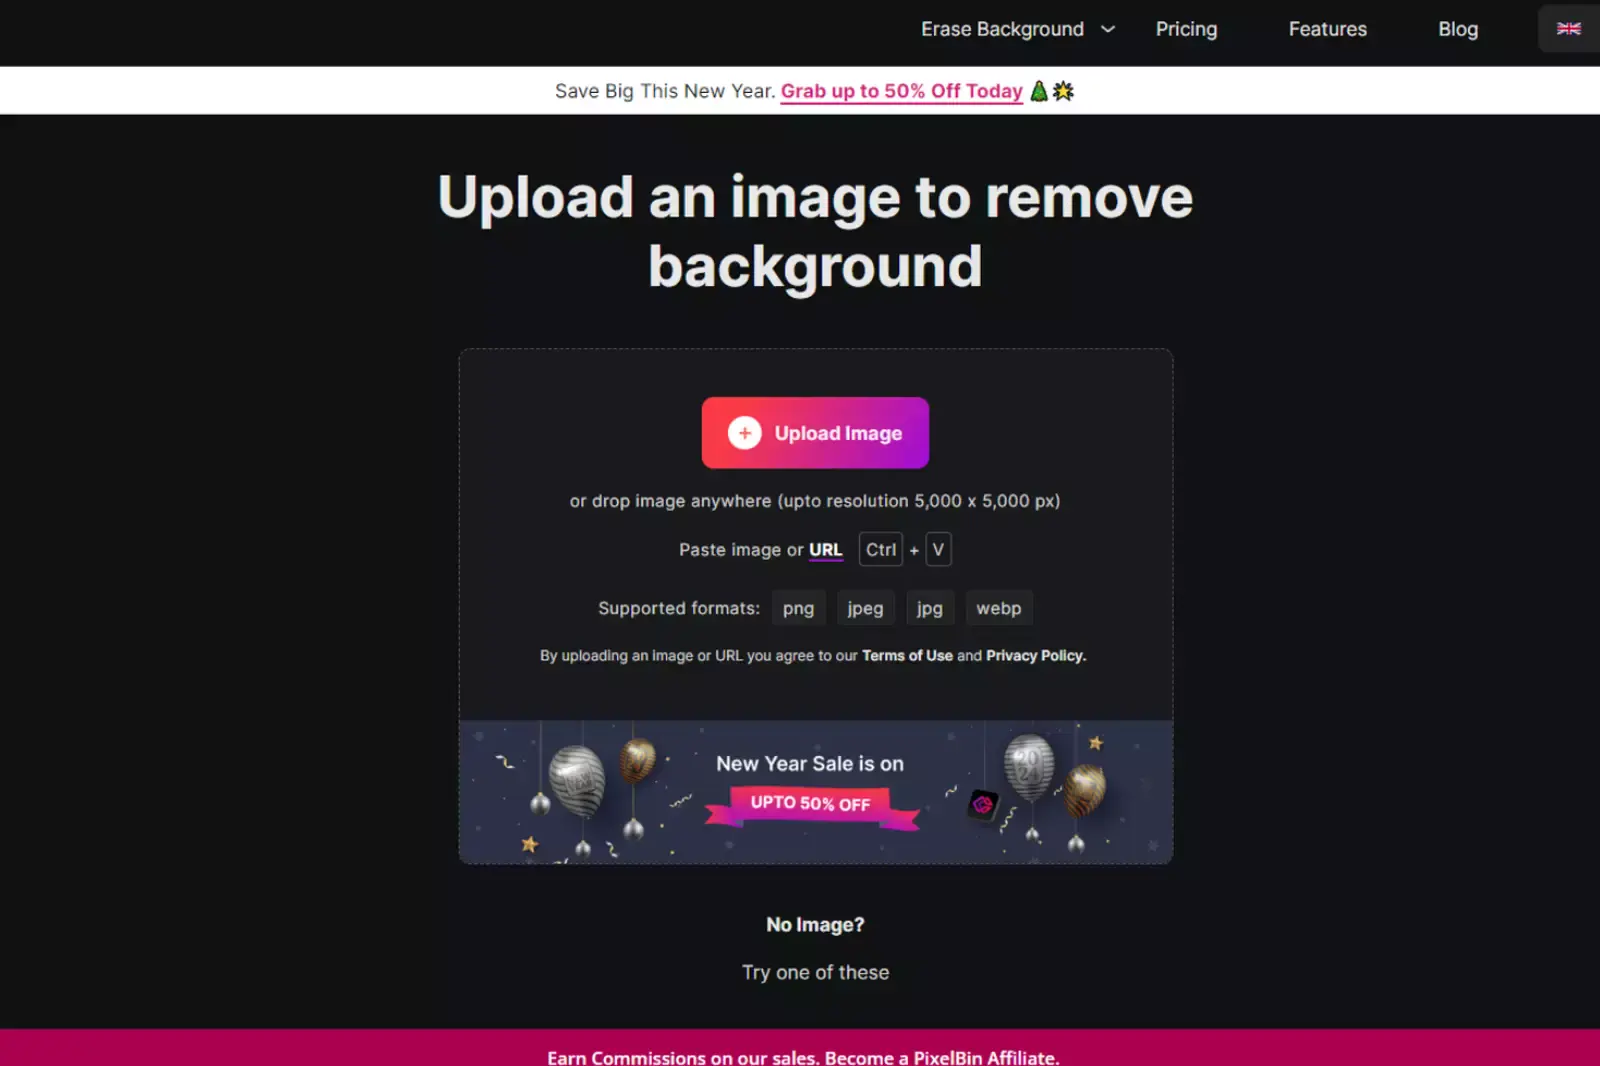 Home Page of Upload Your Image